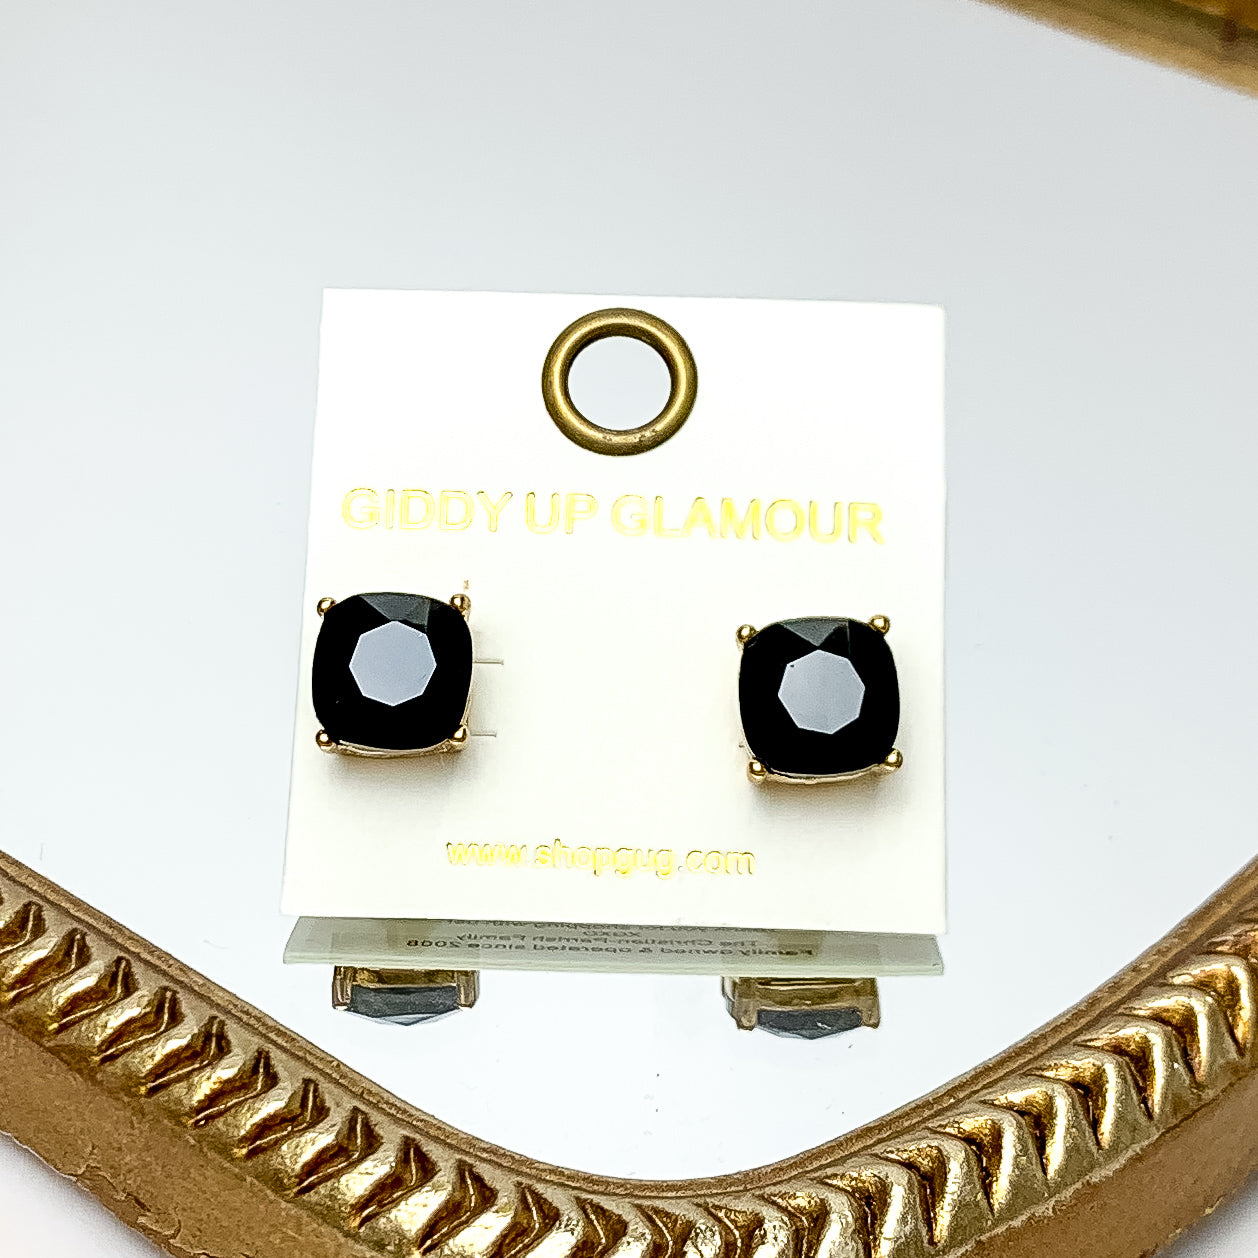 Large Crystal Stud Earrings in Black. These earrings are pictured laying on a gold trimmed mirror.